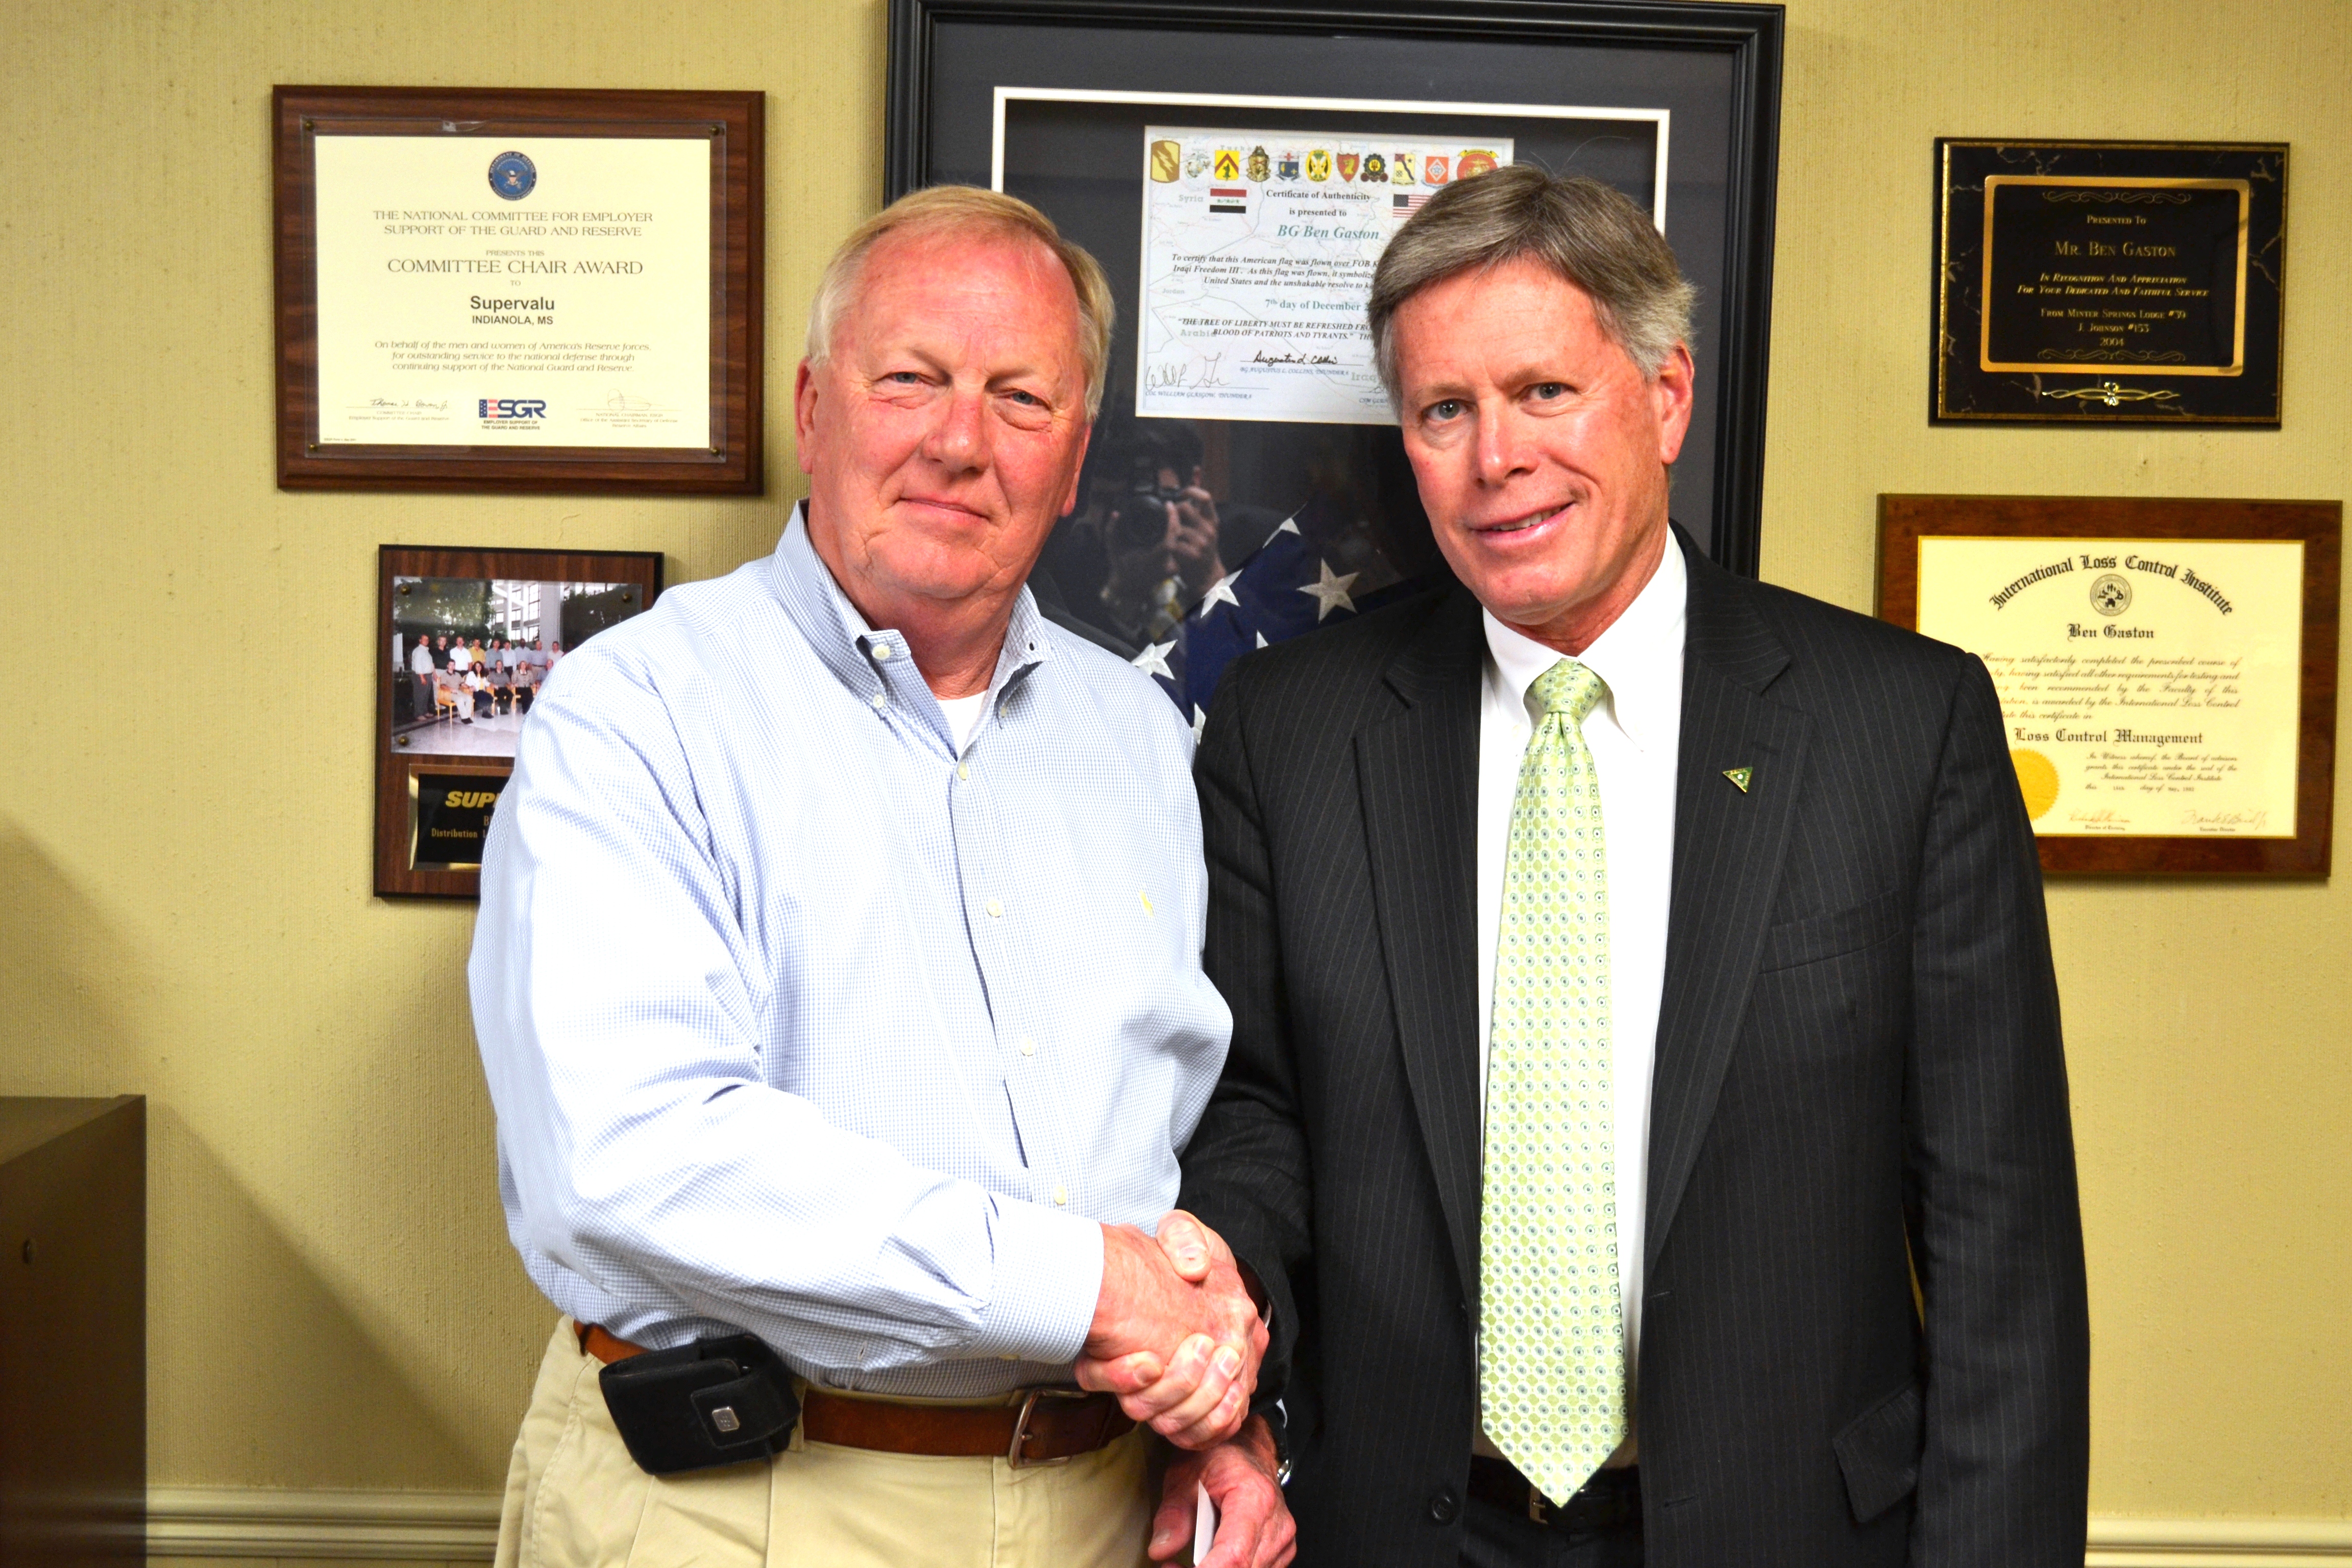 PHOTO:  President William N. LaForge met with Major General James Gaston, General Manager of SUPERVALU to discuss fundraising ideas for the benefit of Delta State University.